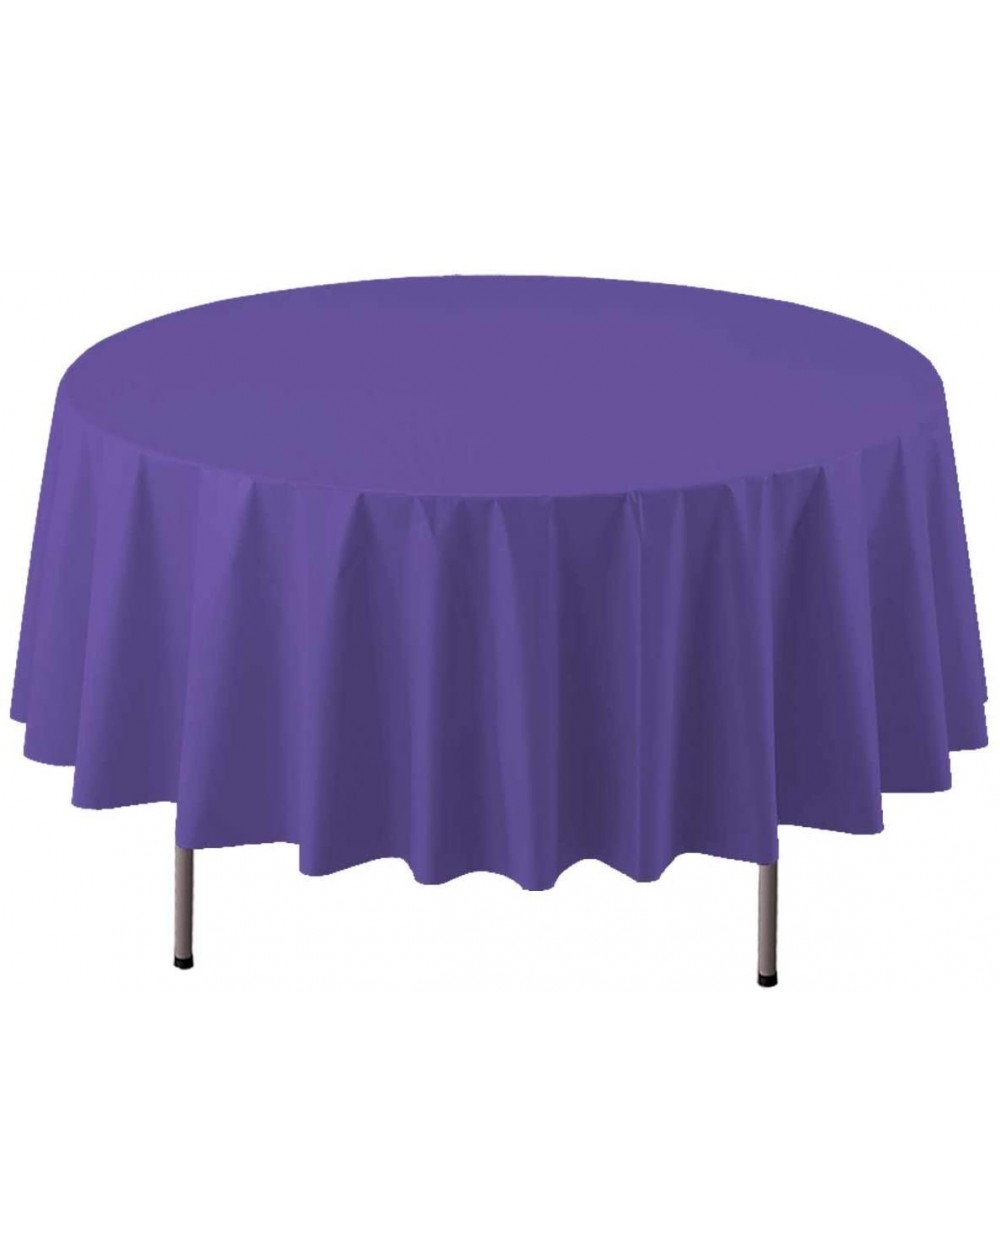 Tablecovers ValuMost Round Plastic Table Cover Available in 16 Colors- 84"- Royal Purple - Royal Purple - CH11DGD93F3 $11.89